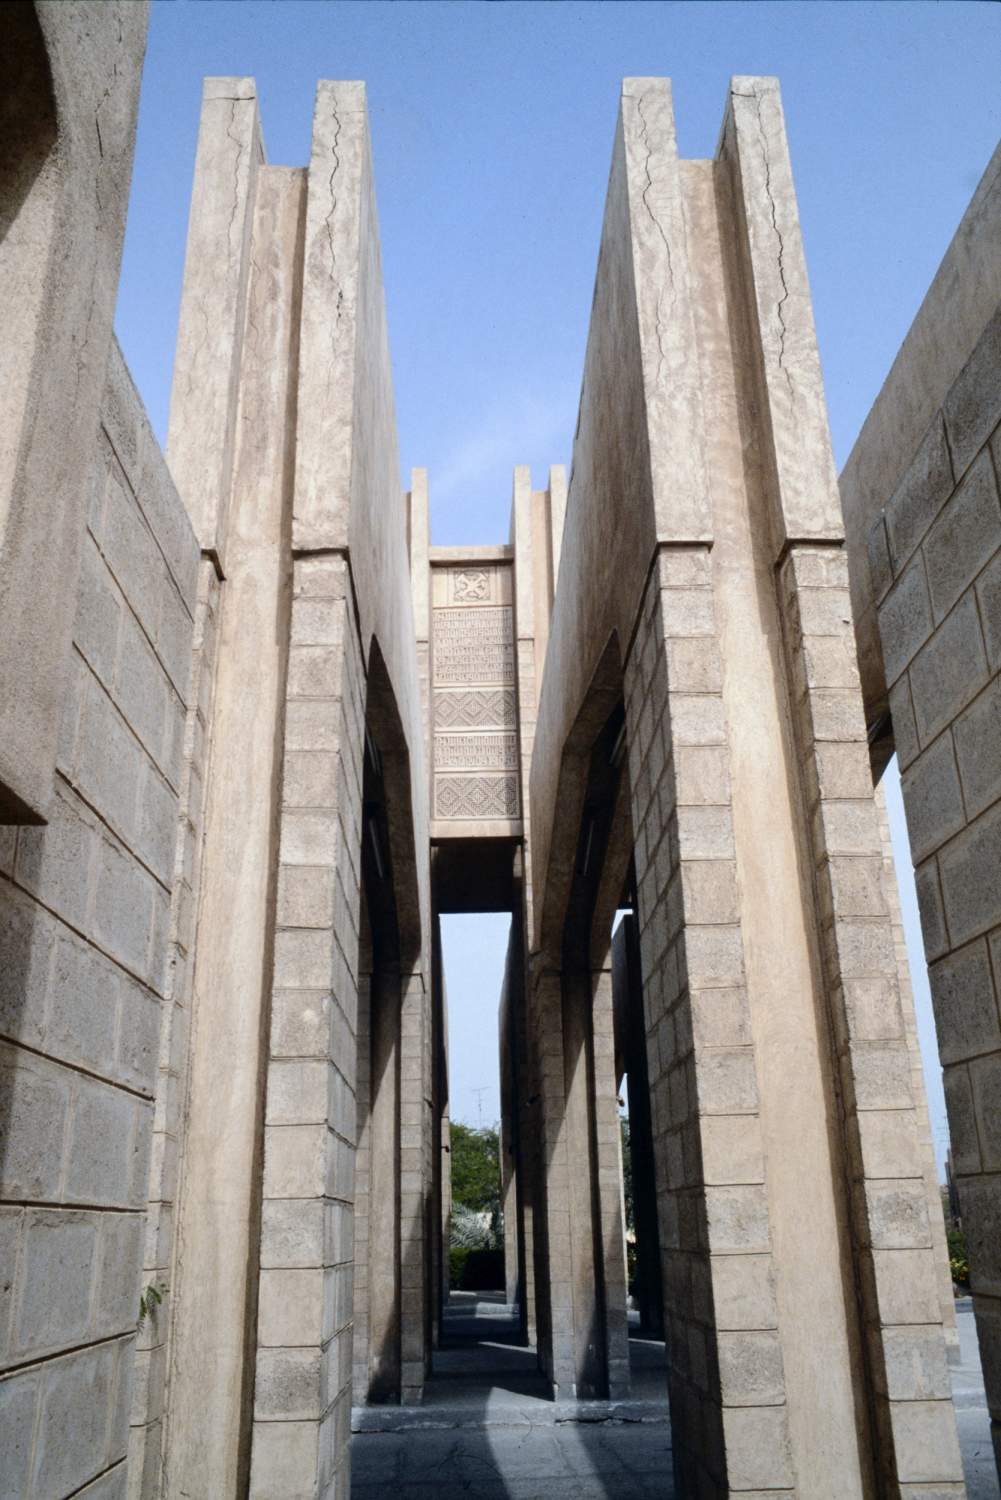 <p>View through side of gate, showing detail of concrete arches.</p>